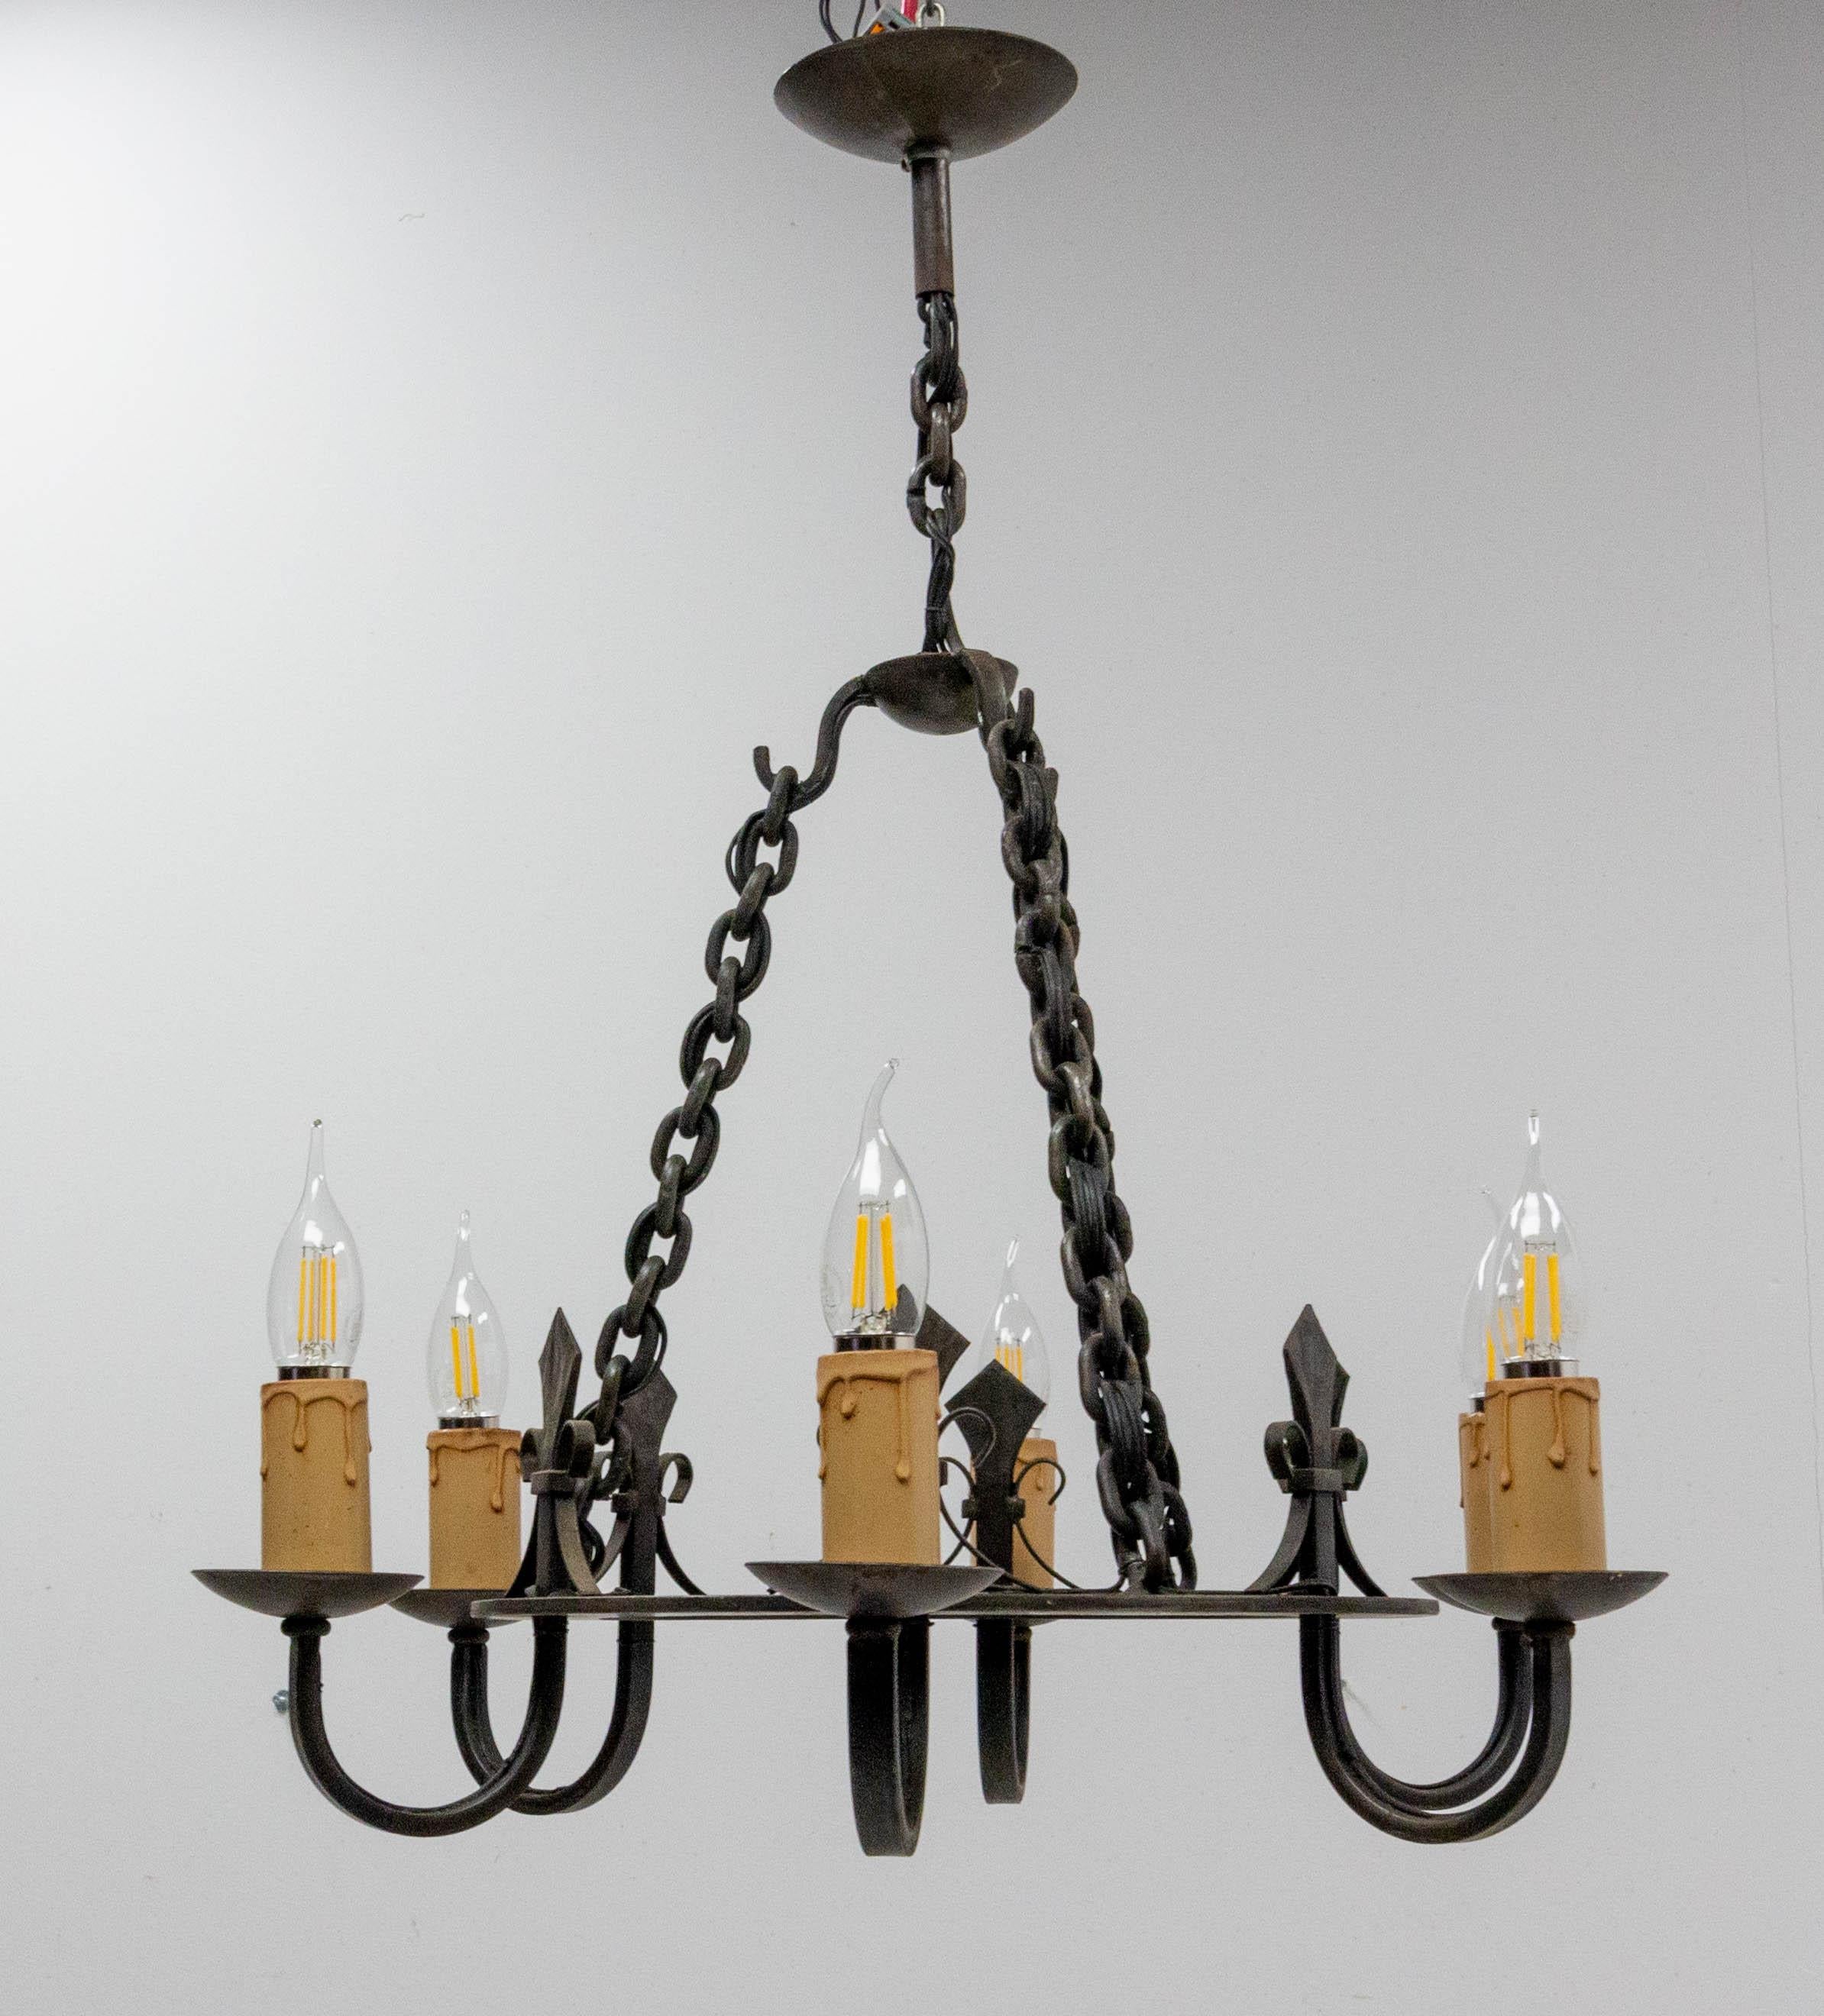 Chandelier or Lustre, French
Wrought iron with fleur-de-lis
Mid-century
Good vintage condition.
This can be rewired to USA or EU and UK standards.

Shipping:
D 58 H 20 6kg.